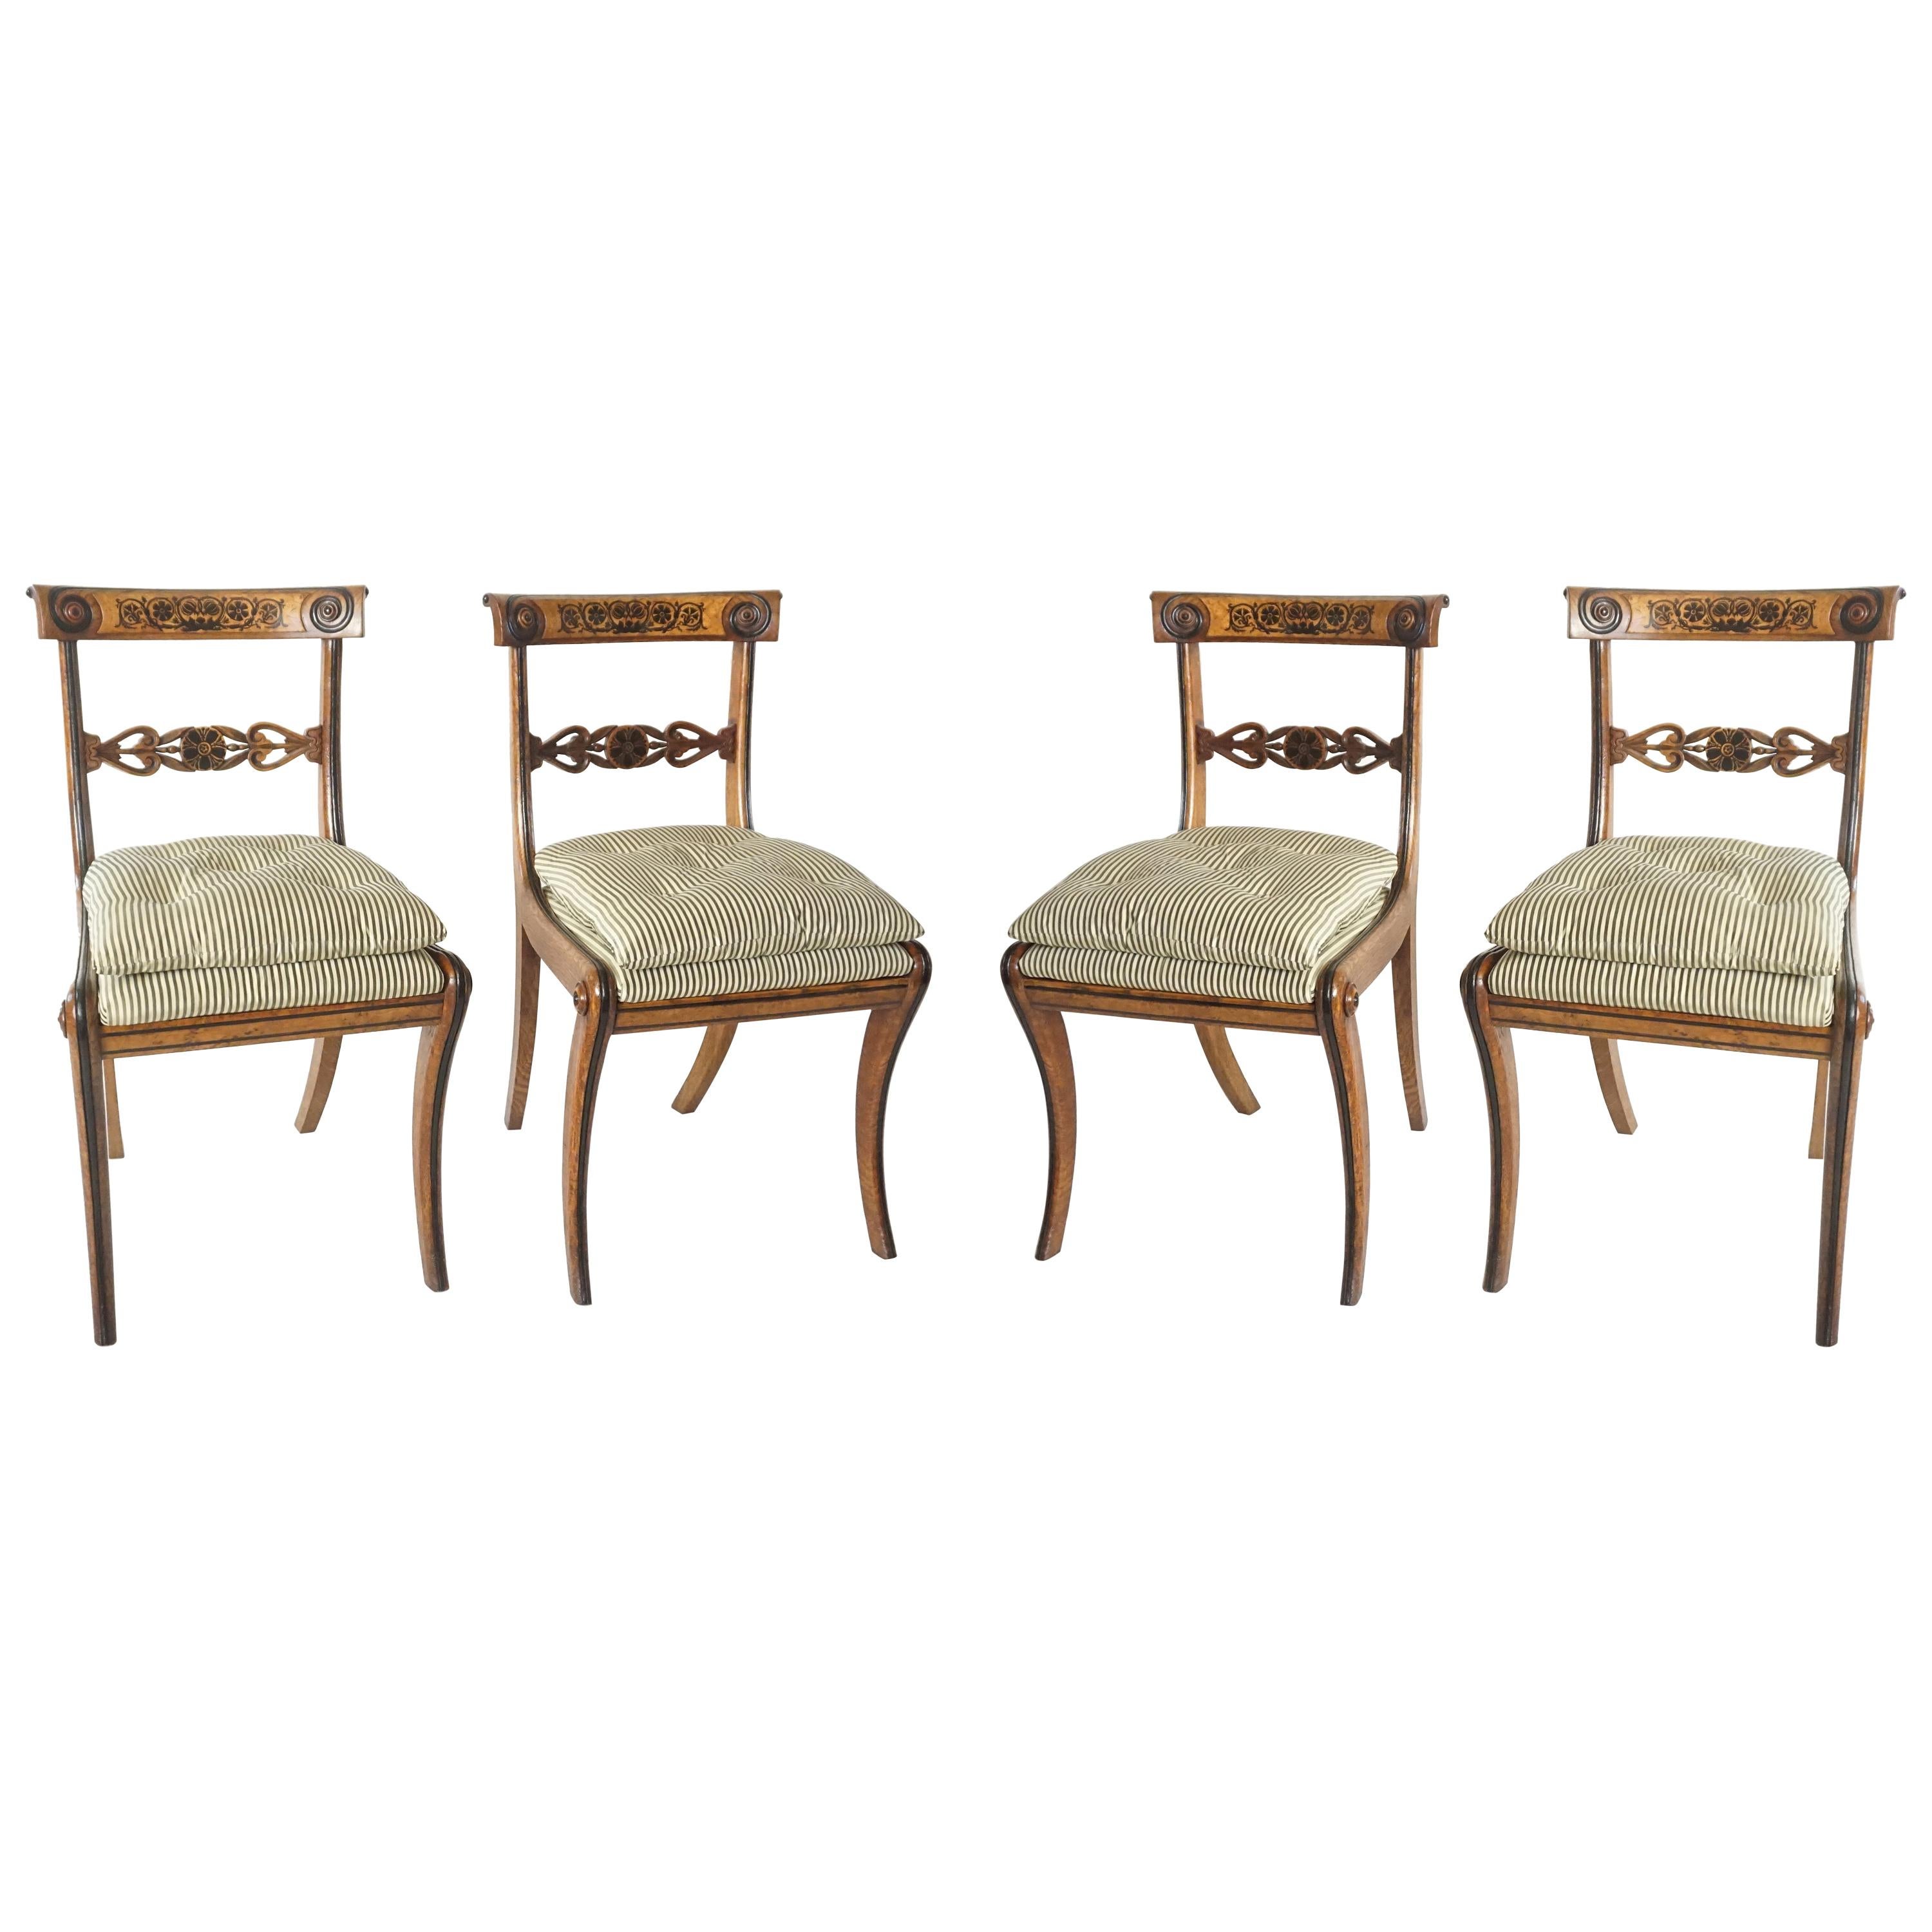 Chairs by George Bullock, Set of 4, England, 1816